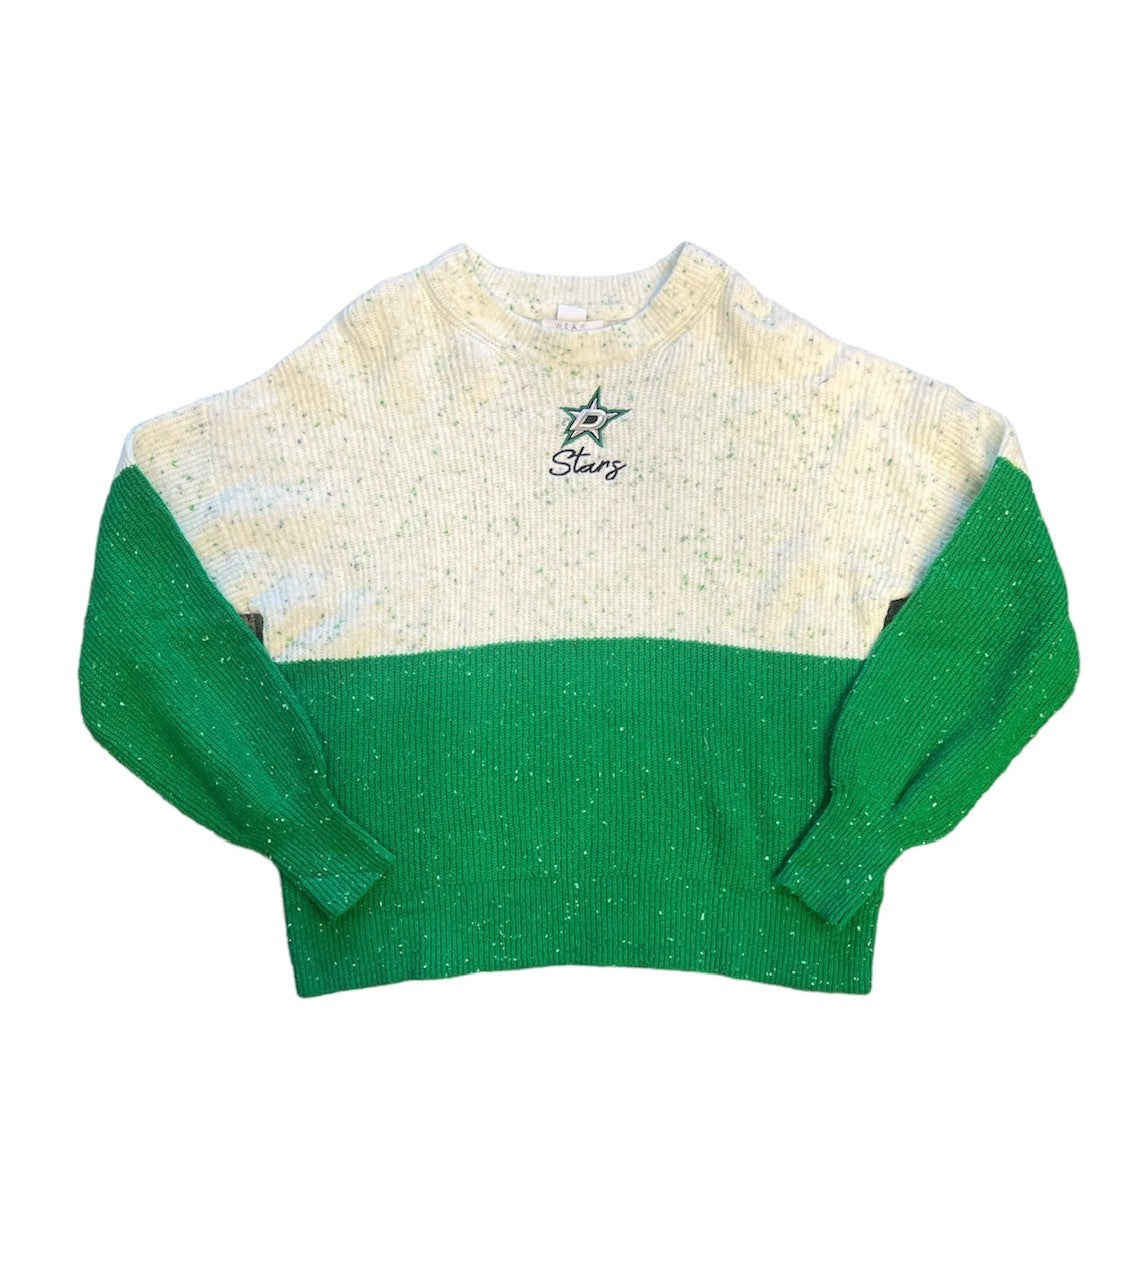 DALLAS STARS WEAR BY ERIN ANDREWS COLOR BLOCK SWEATER - FRONT VIEW